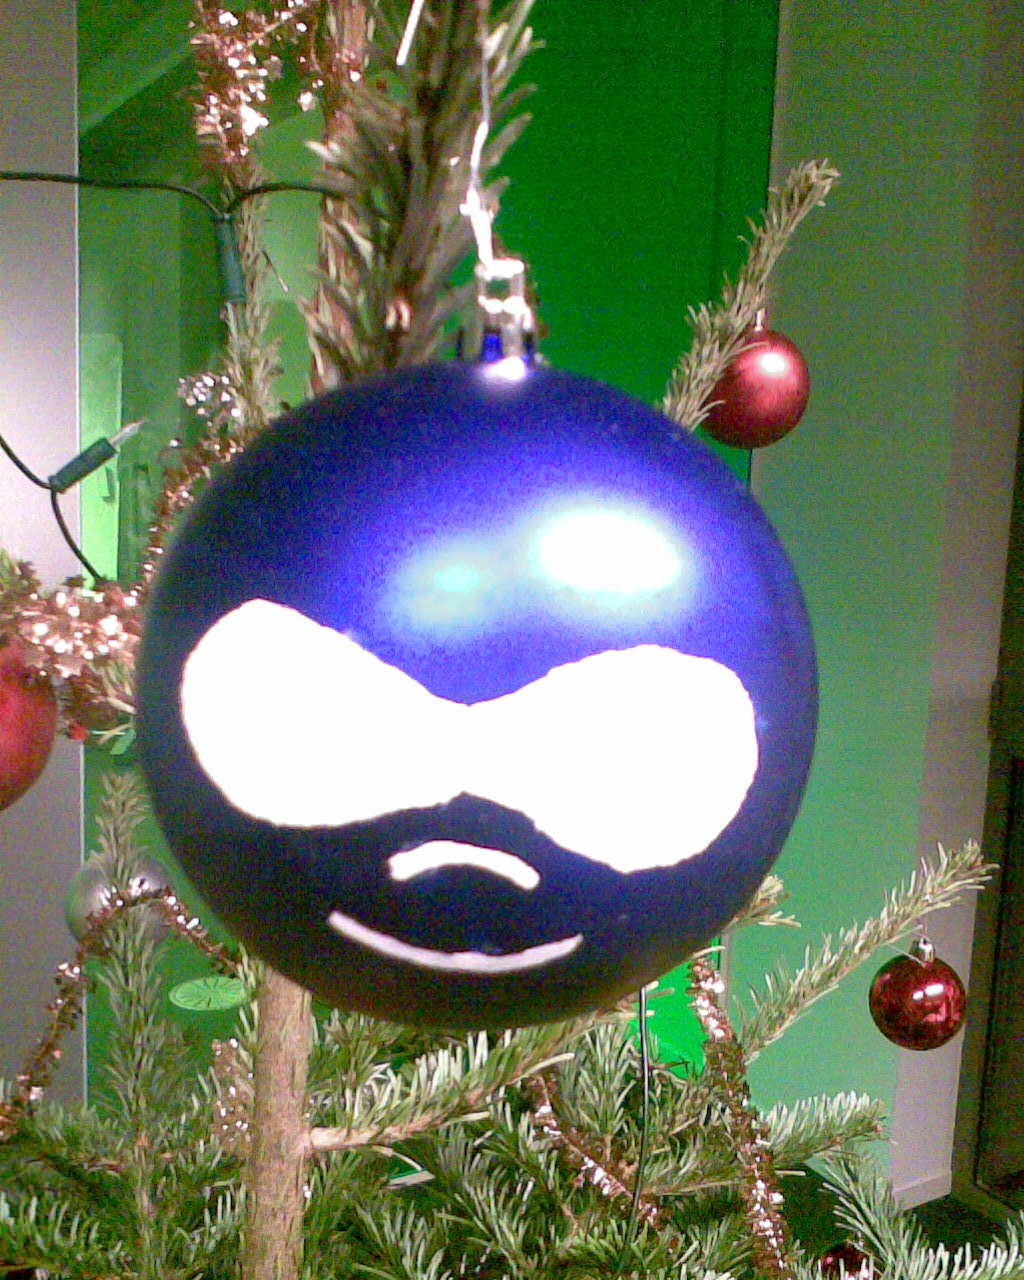 Another close-up of the drupal christmas ball